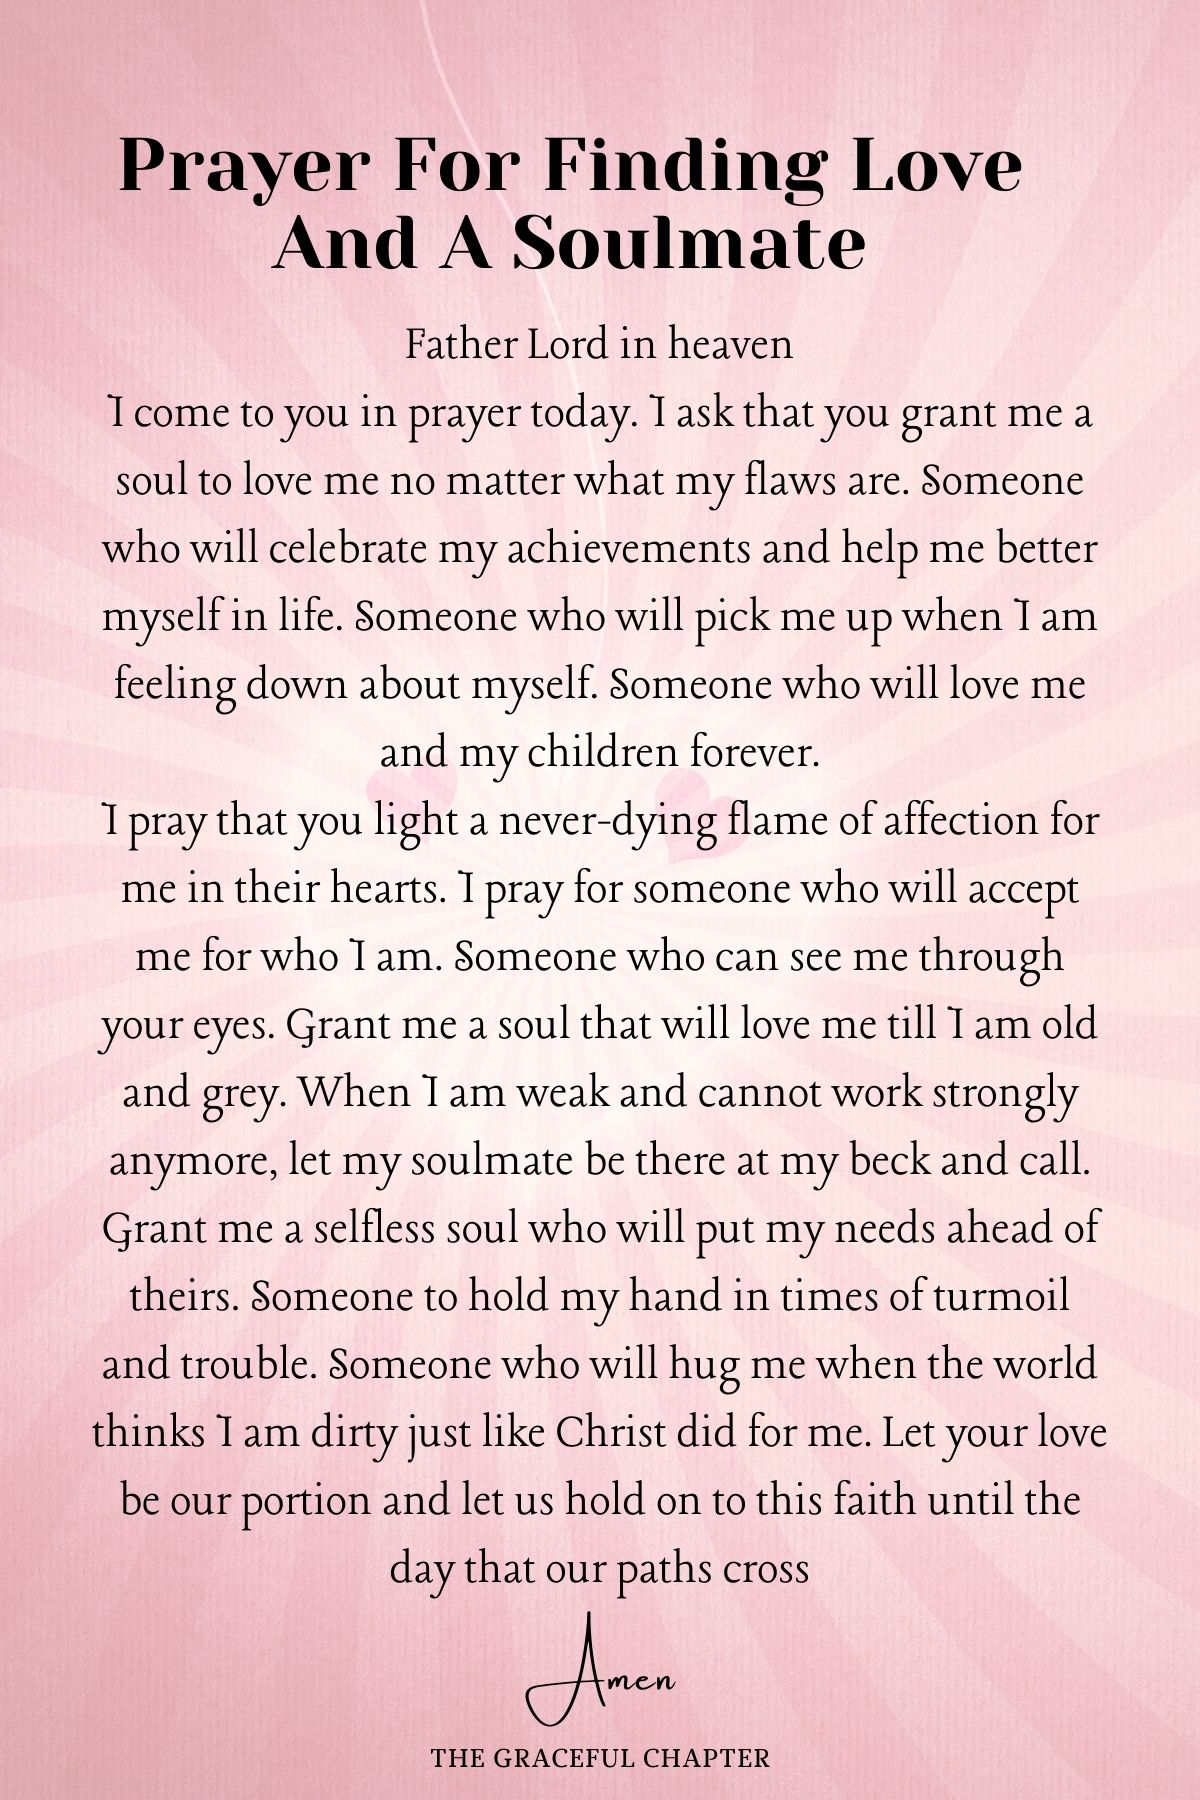 Prayer for finding love and a soulmate